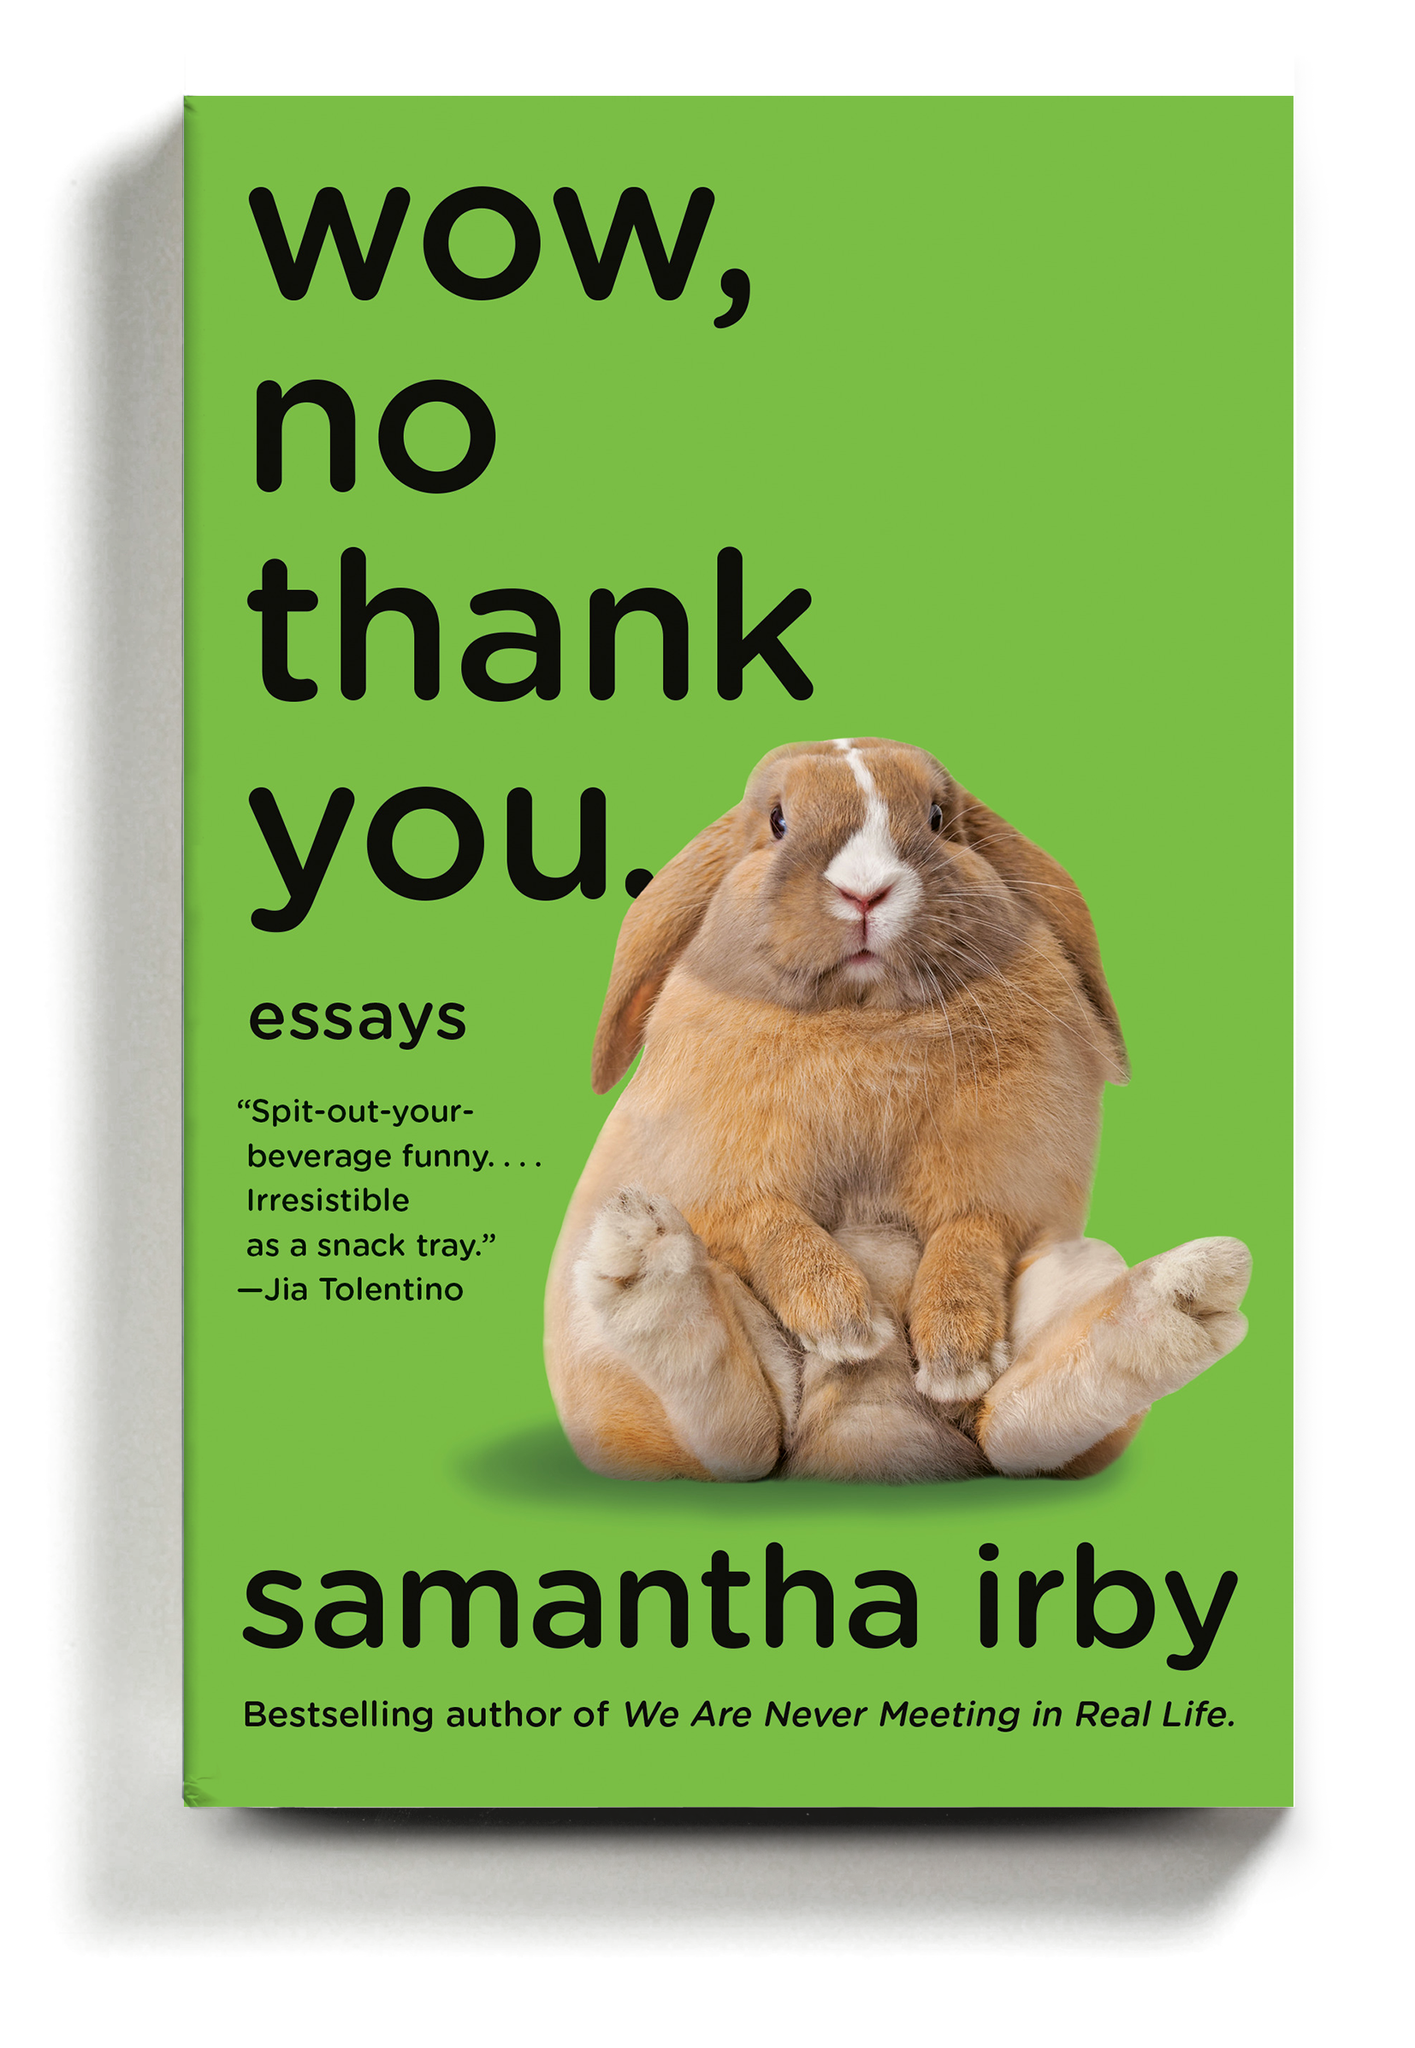 Wow, No Thank You. by Samantha Irby